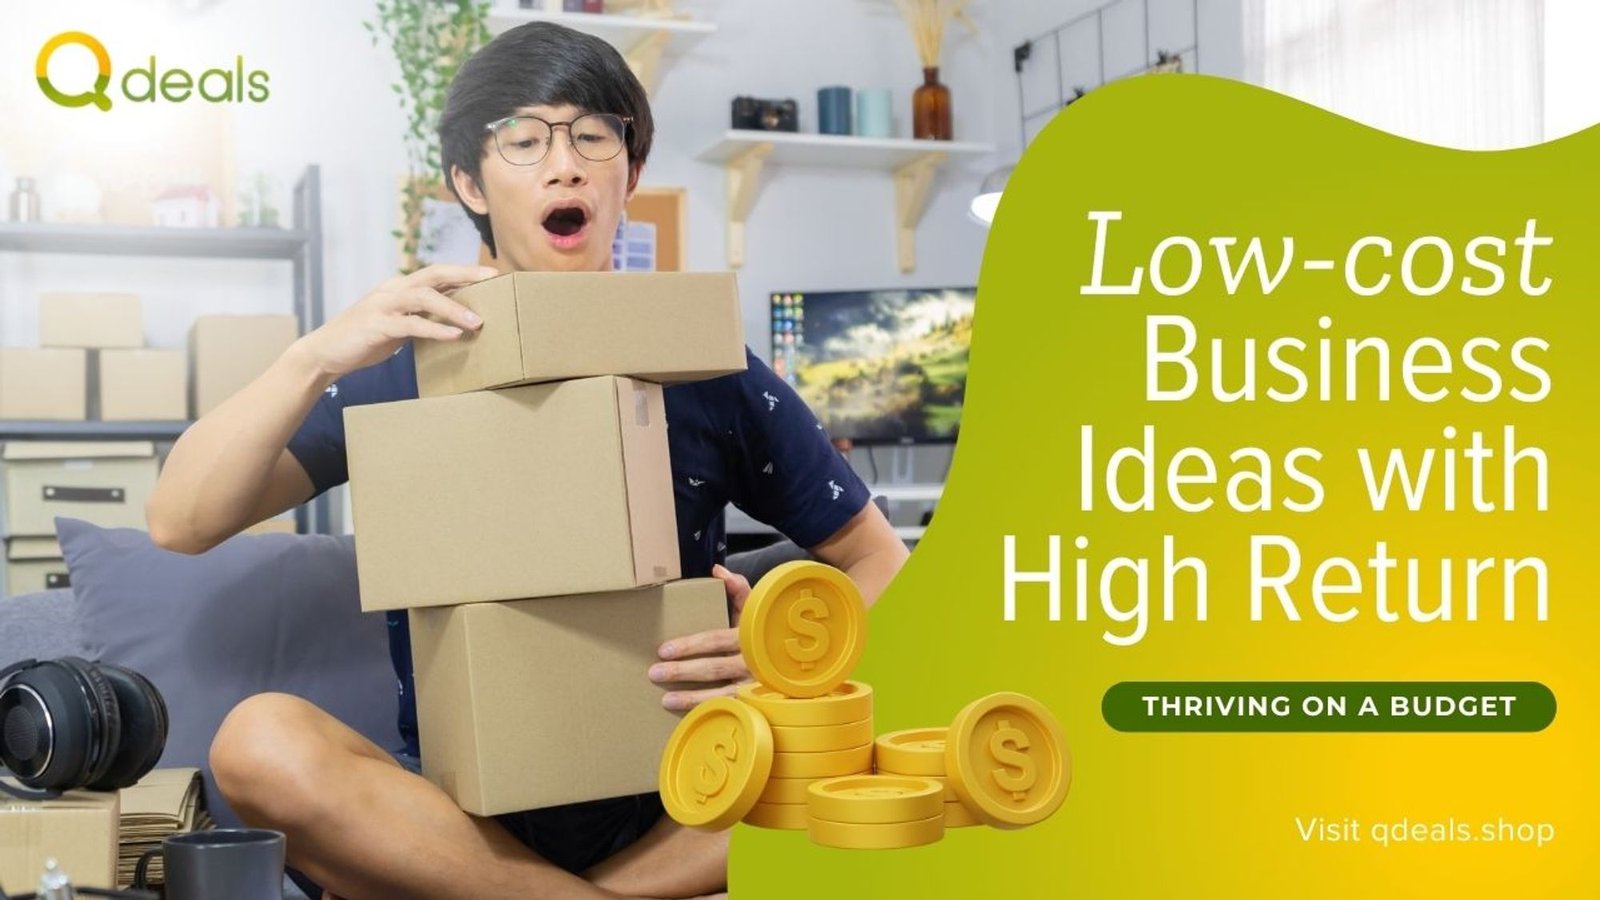 8 Low-Cost Business Ideas with High-Profit Potential